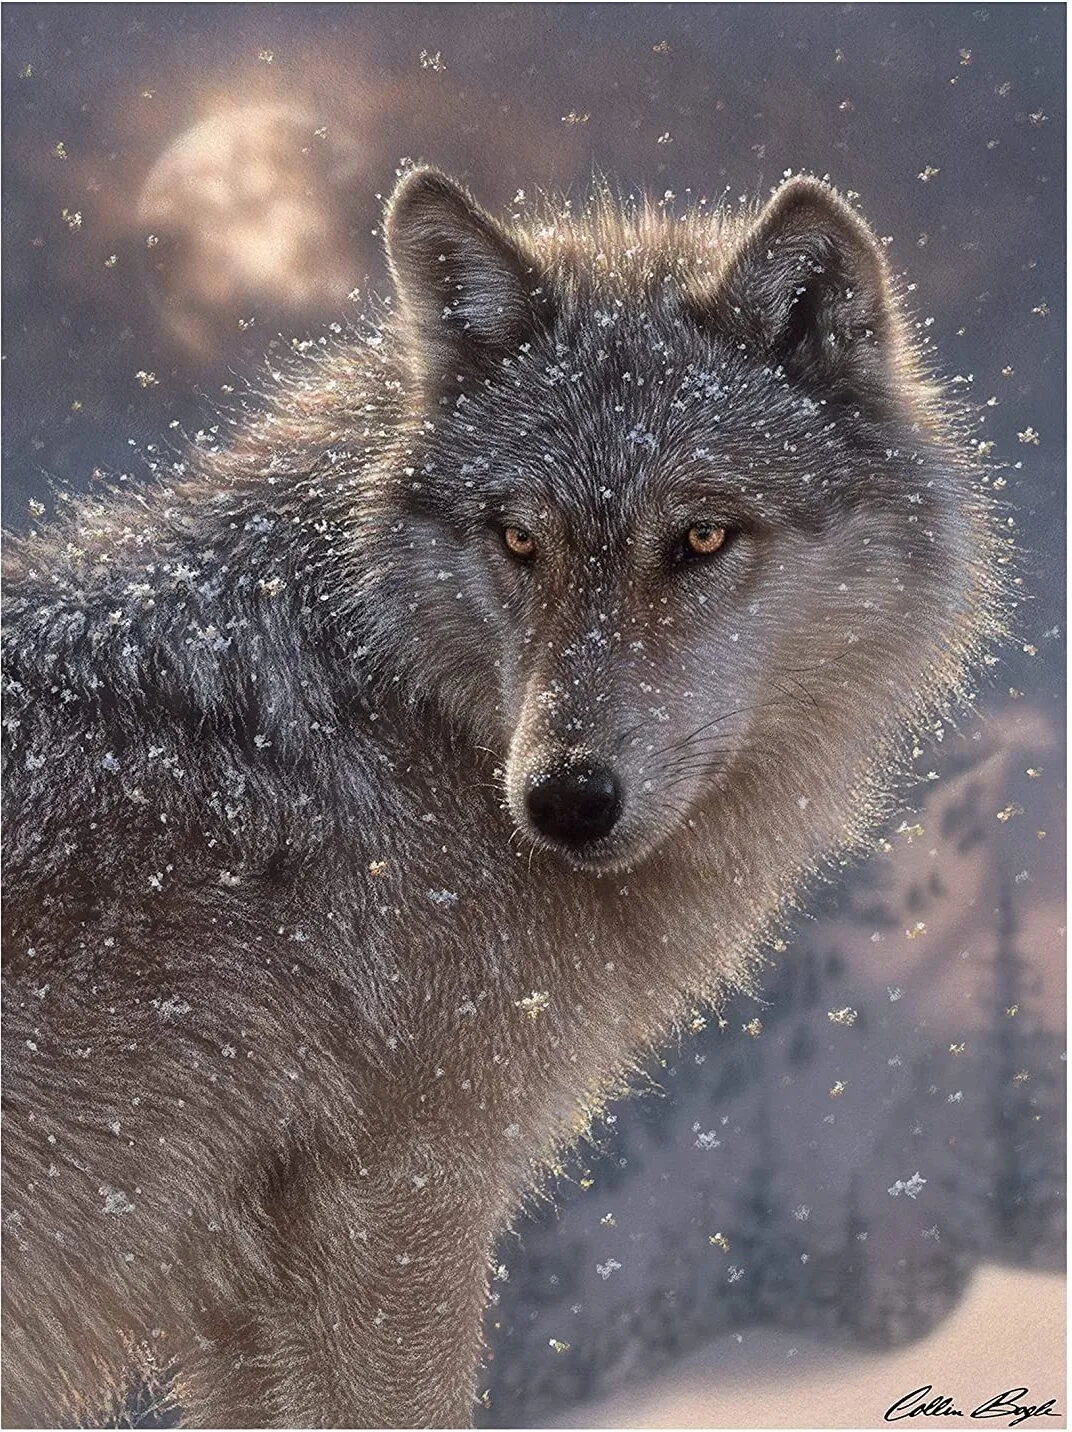 A wolf looks into past the camera with full moon in background